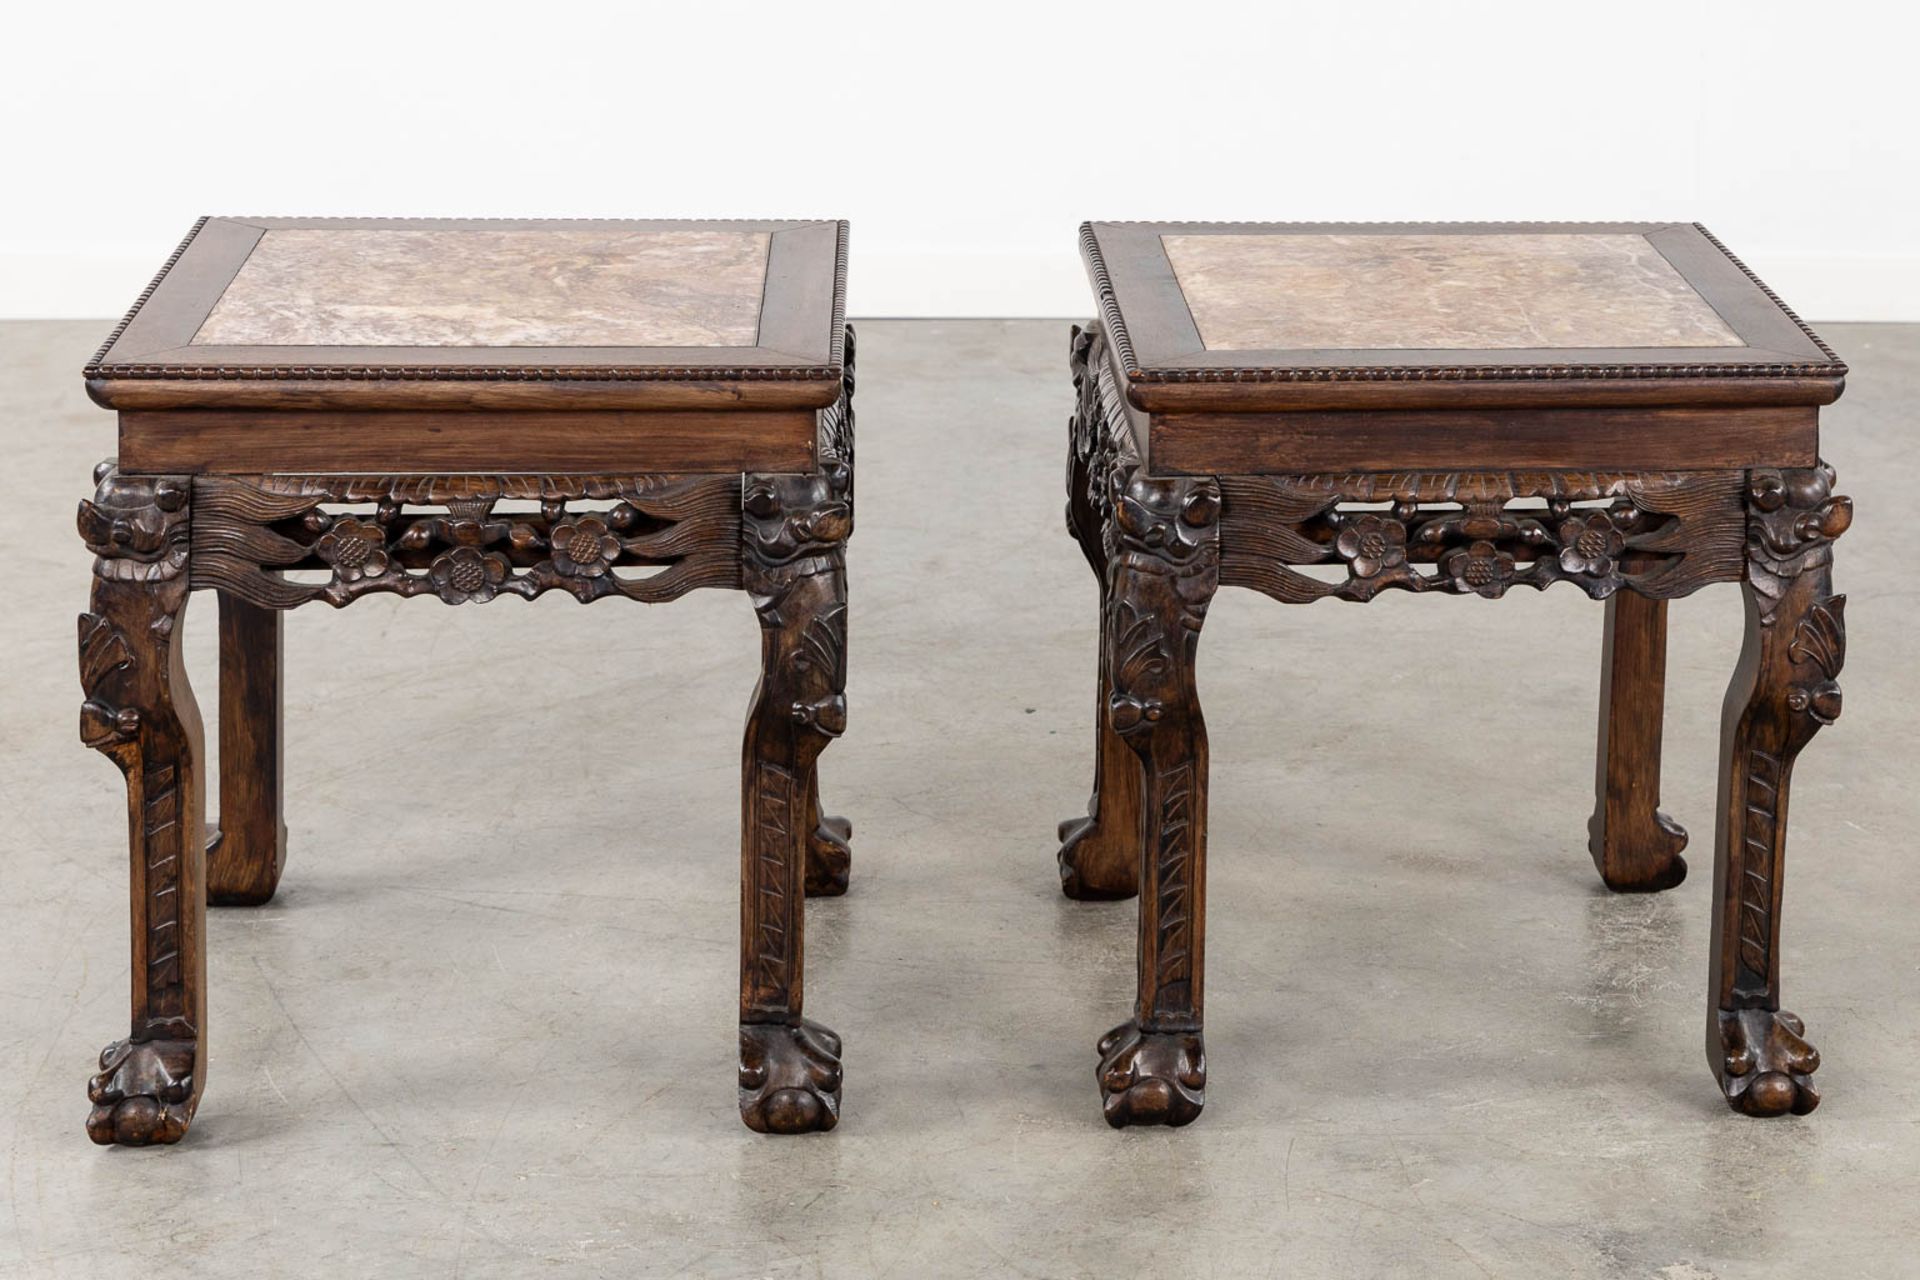 A pair of square Chinese side tables, hardwood with a marble top. (L:44 x W:44 x H:46 cm) - Bild 4 aus 11